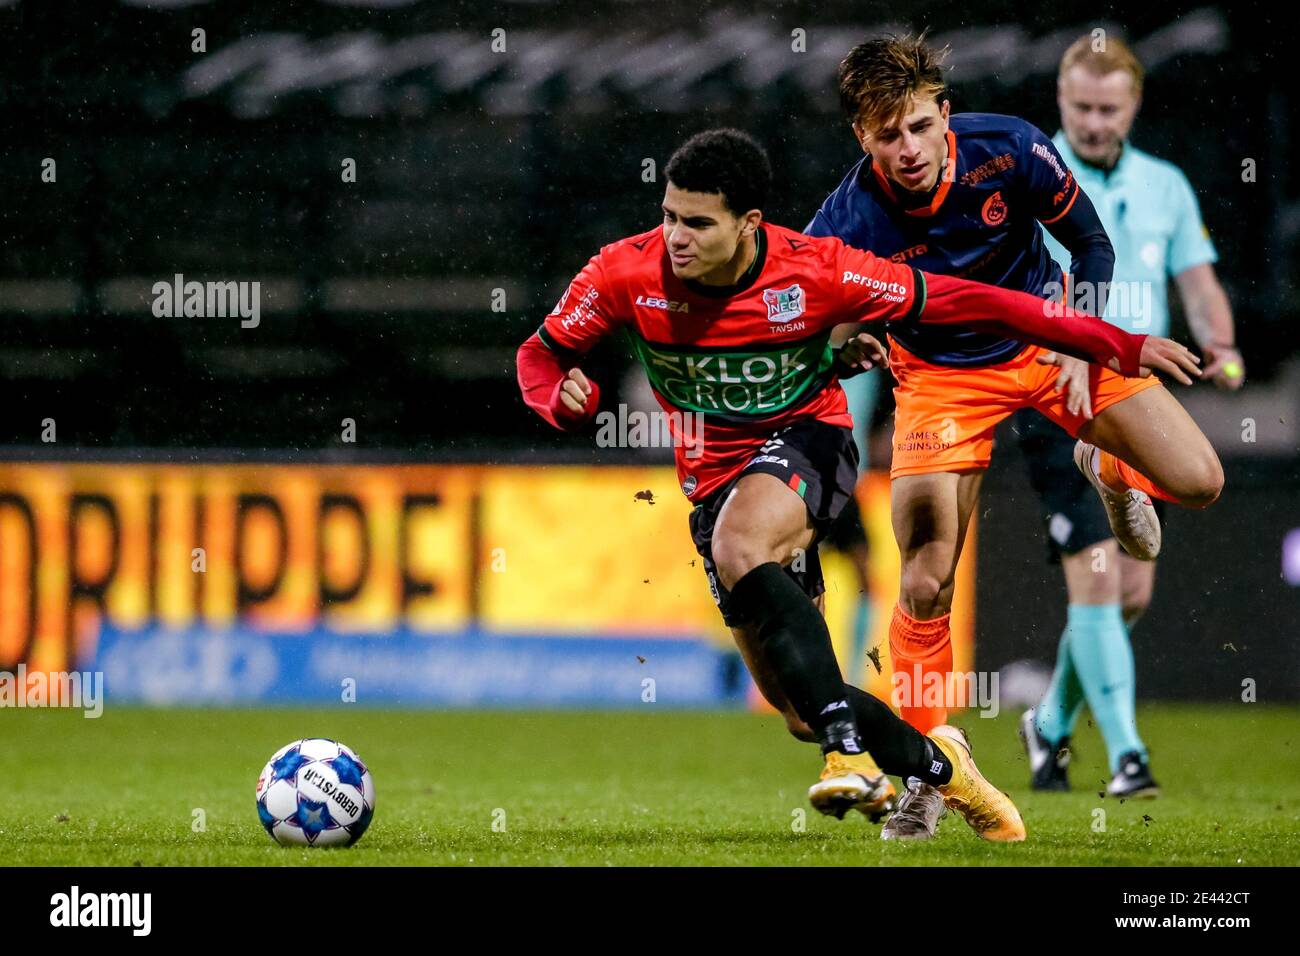 NIJMEGEN, NETHERLANDS - JANUARY 21: (L-R): Elayis Tavsan of NEC, Lazaros Rota of Fortuna Sittard during the Dutch KNVB Cup match between NEC and Fortu Stock Photo